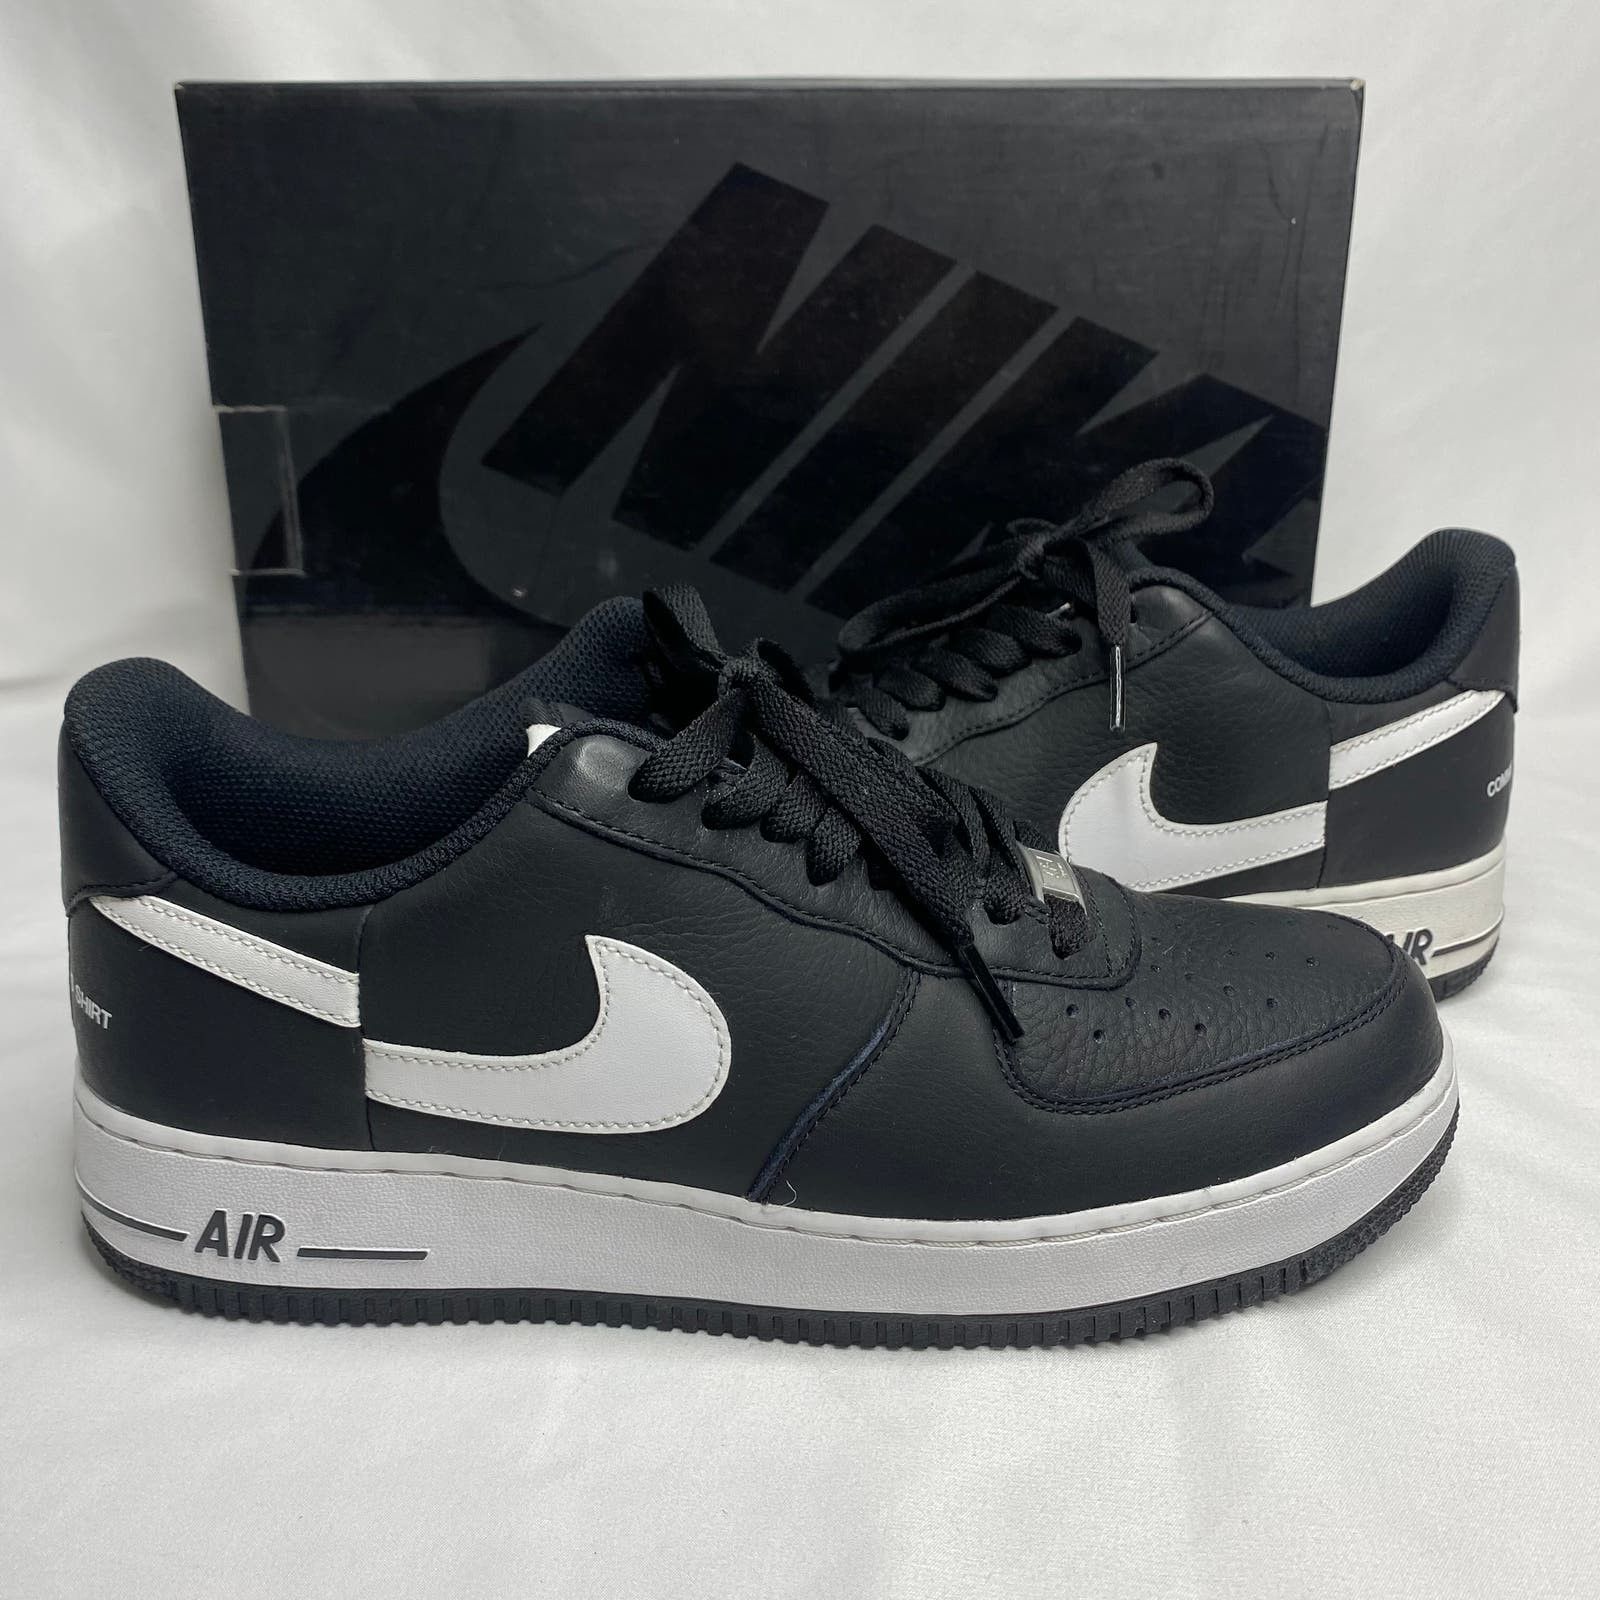 Supreme Nike Supreme CDG Air Force 1 Low in Black White size 9 ...